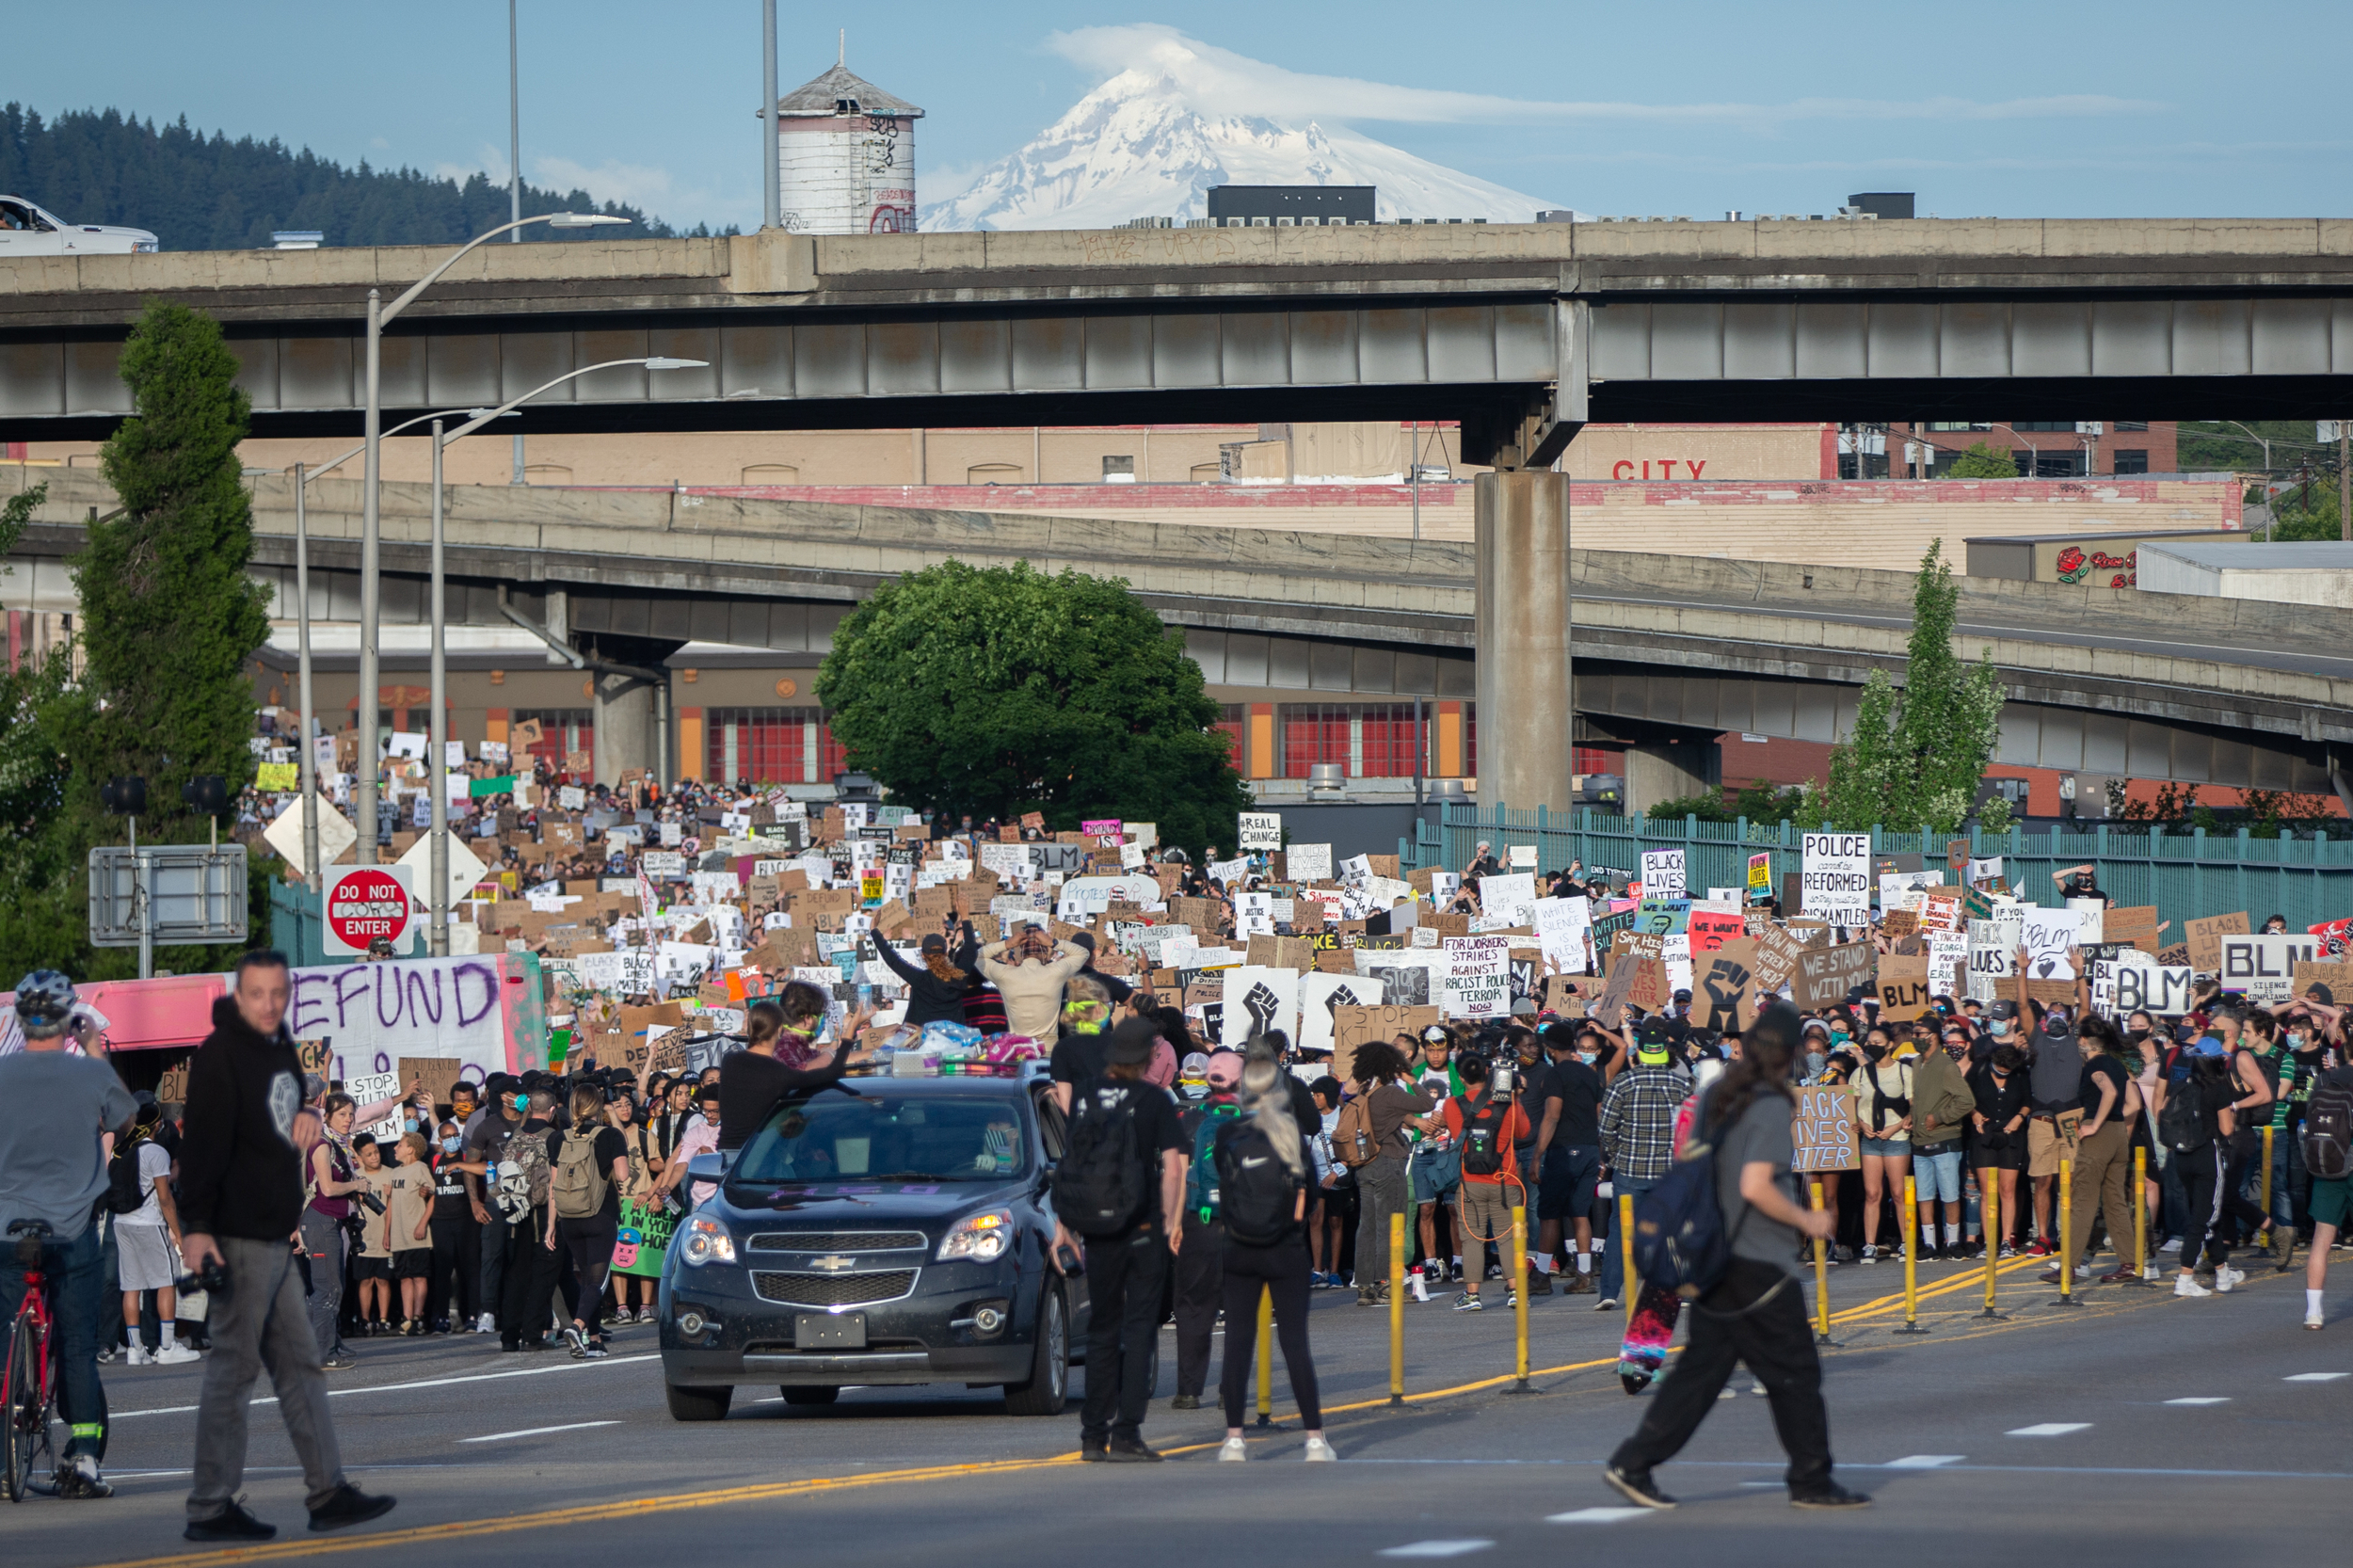 Protesters took to the streets of Portland, Ore., for the eighth consecutive day of demonstrations demanding equal rights and protesting against racial injustice and police brutality in the wake of the death of George Floyd, a black man killed by police in Minneapolis. Mark Graves/Staff Mark Graves